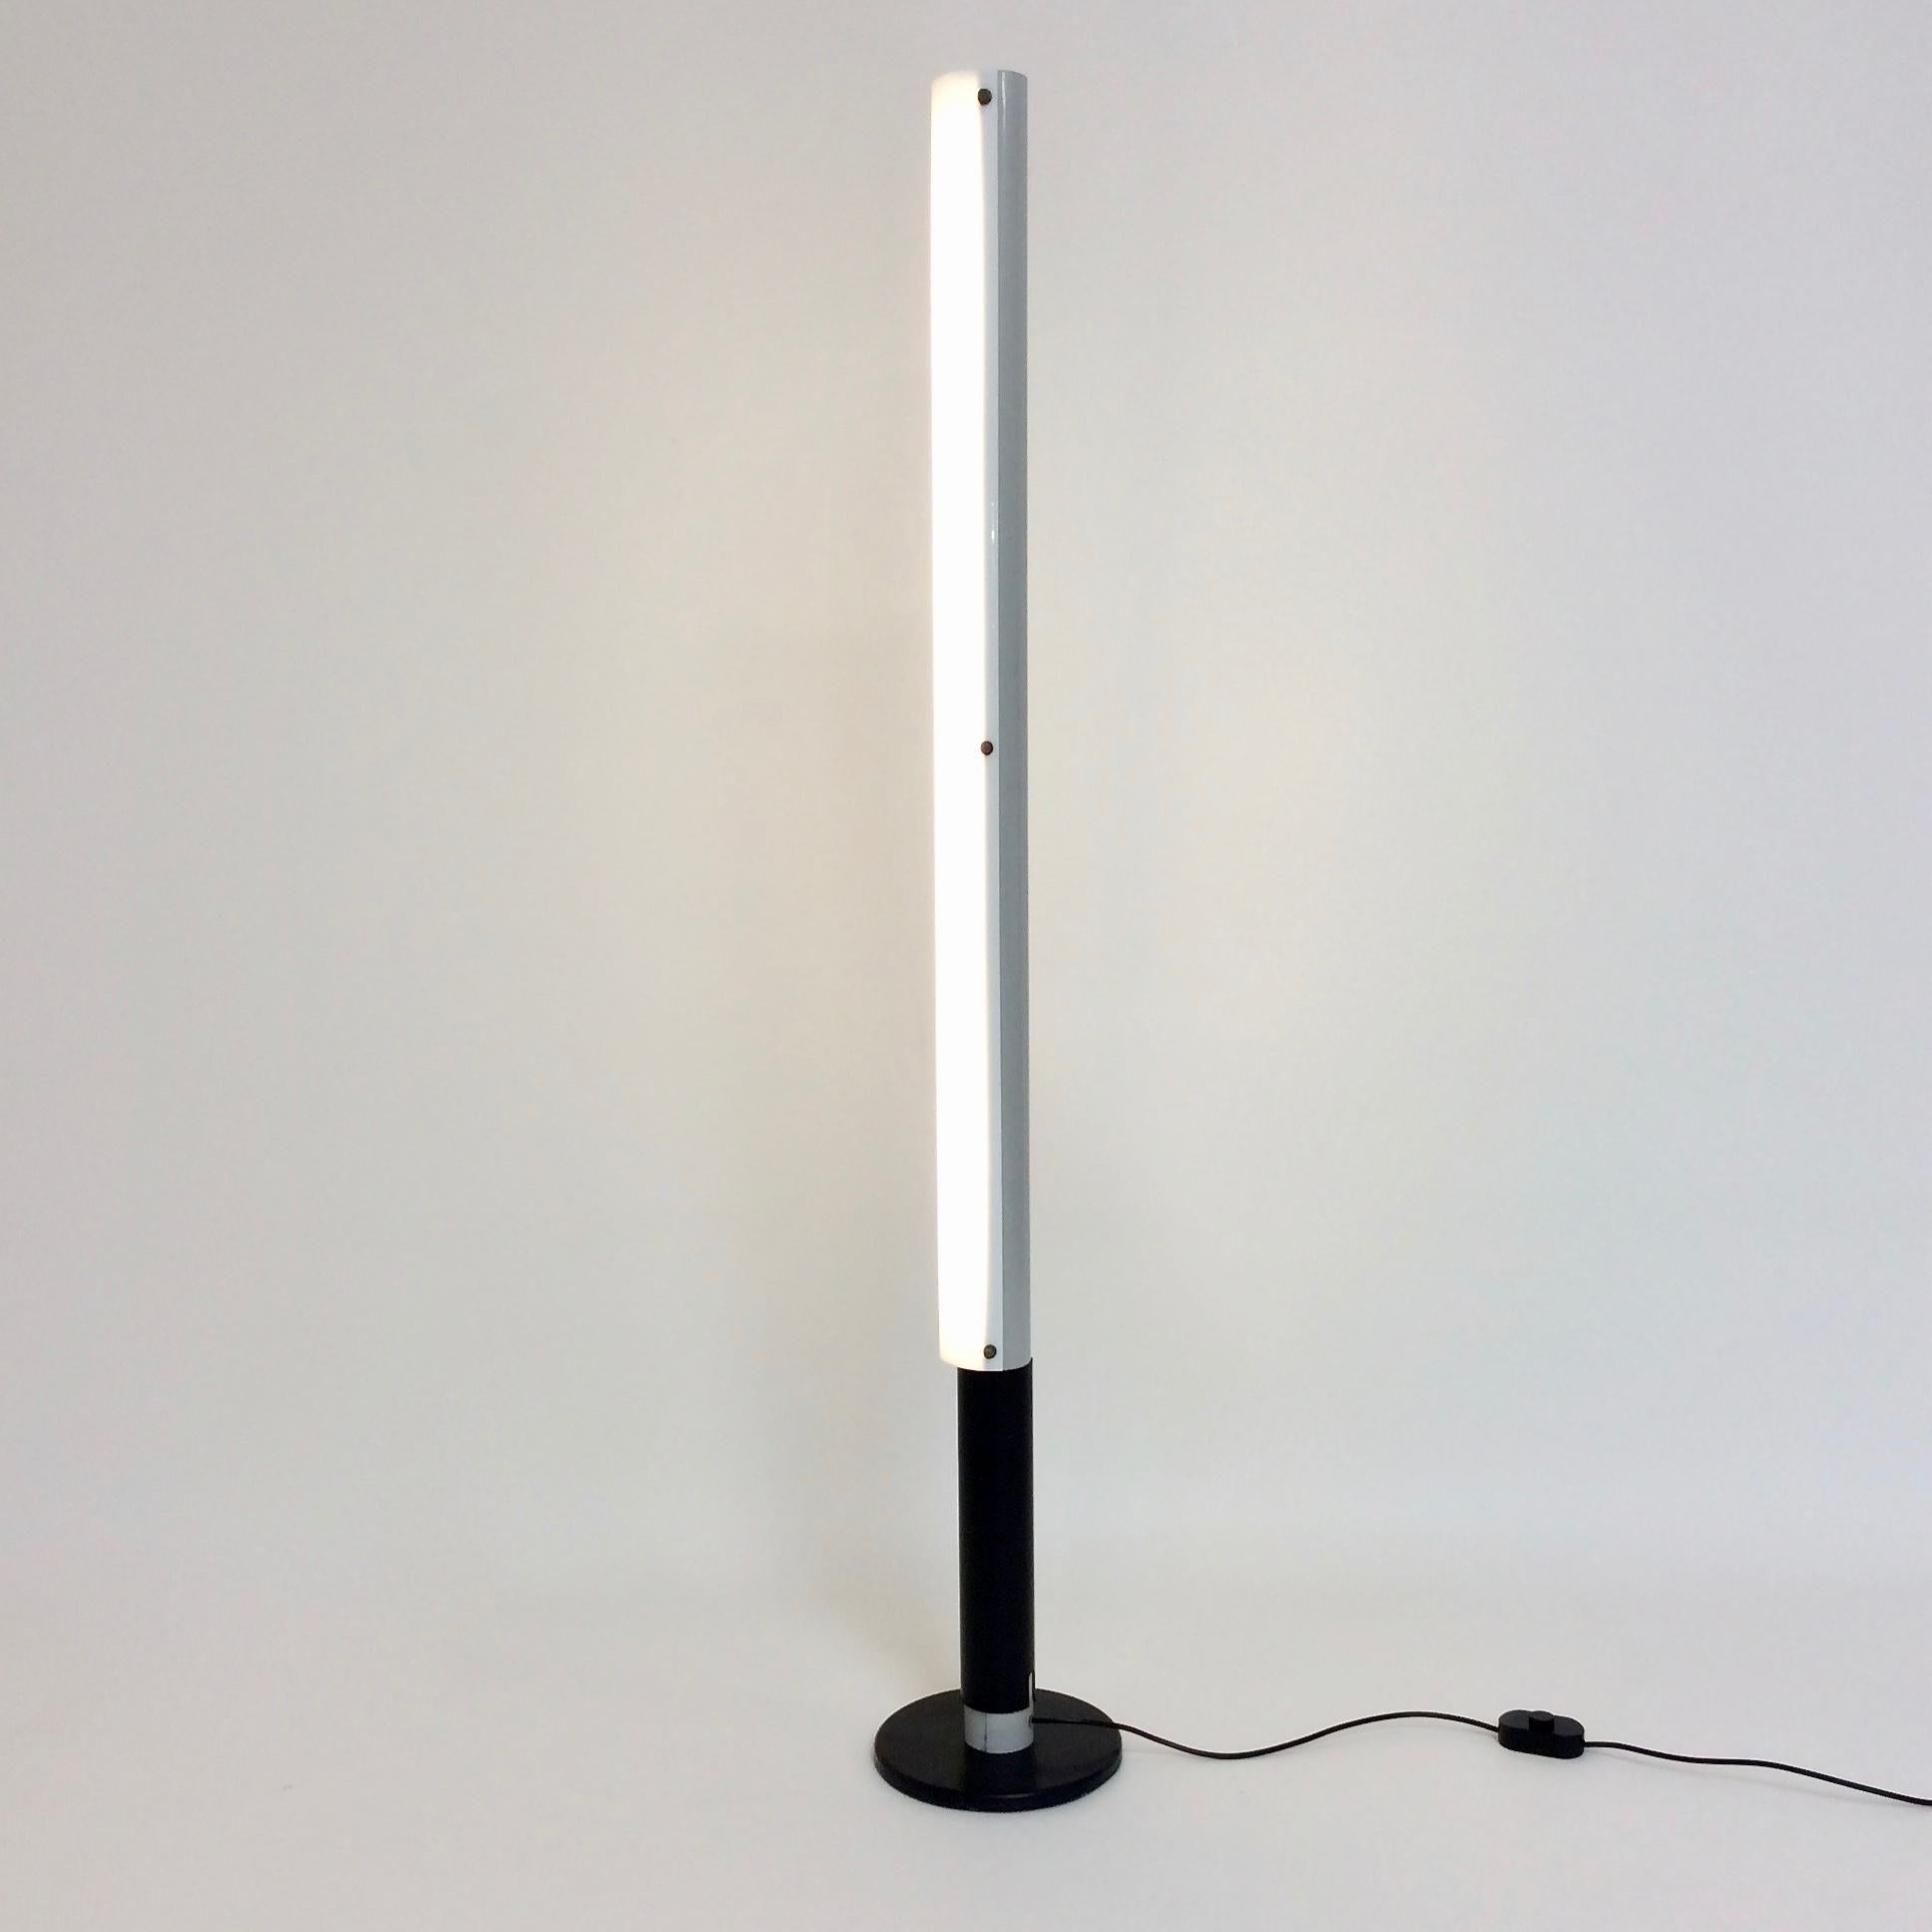 Rare Johan Niegeman ST84 floor lamp for Artiforte, 1957, Holland.
Grey and black lacquered metal, white plexiglas.
Dimensions: 162 cm H, 11 cm W, 25 cm D.
Good original condition.
 All purchases are covered by our Buyer Protection Guarantee.
This